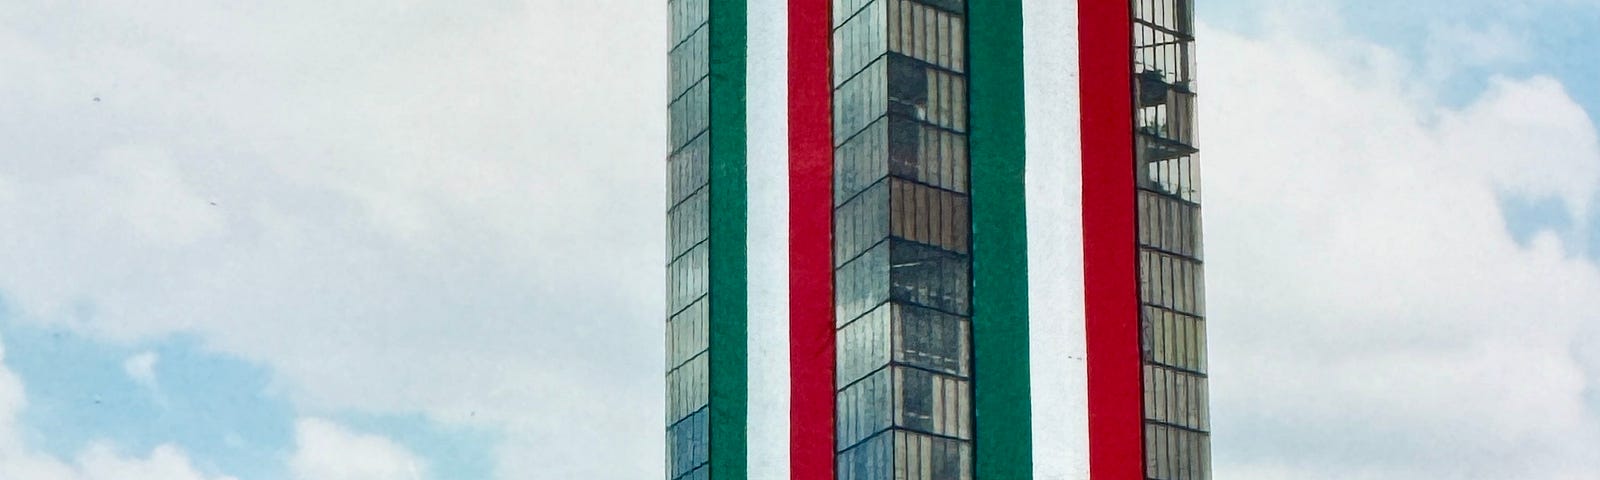 Photo of building in Mexico City, all glass, drapped with two green, white, red banners lengthwise, 25 stories long.